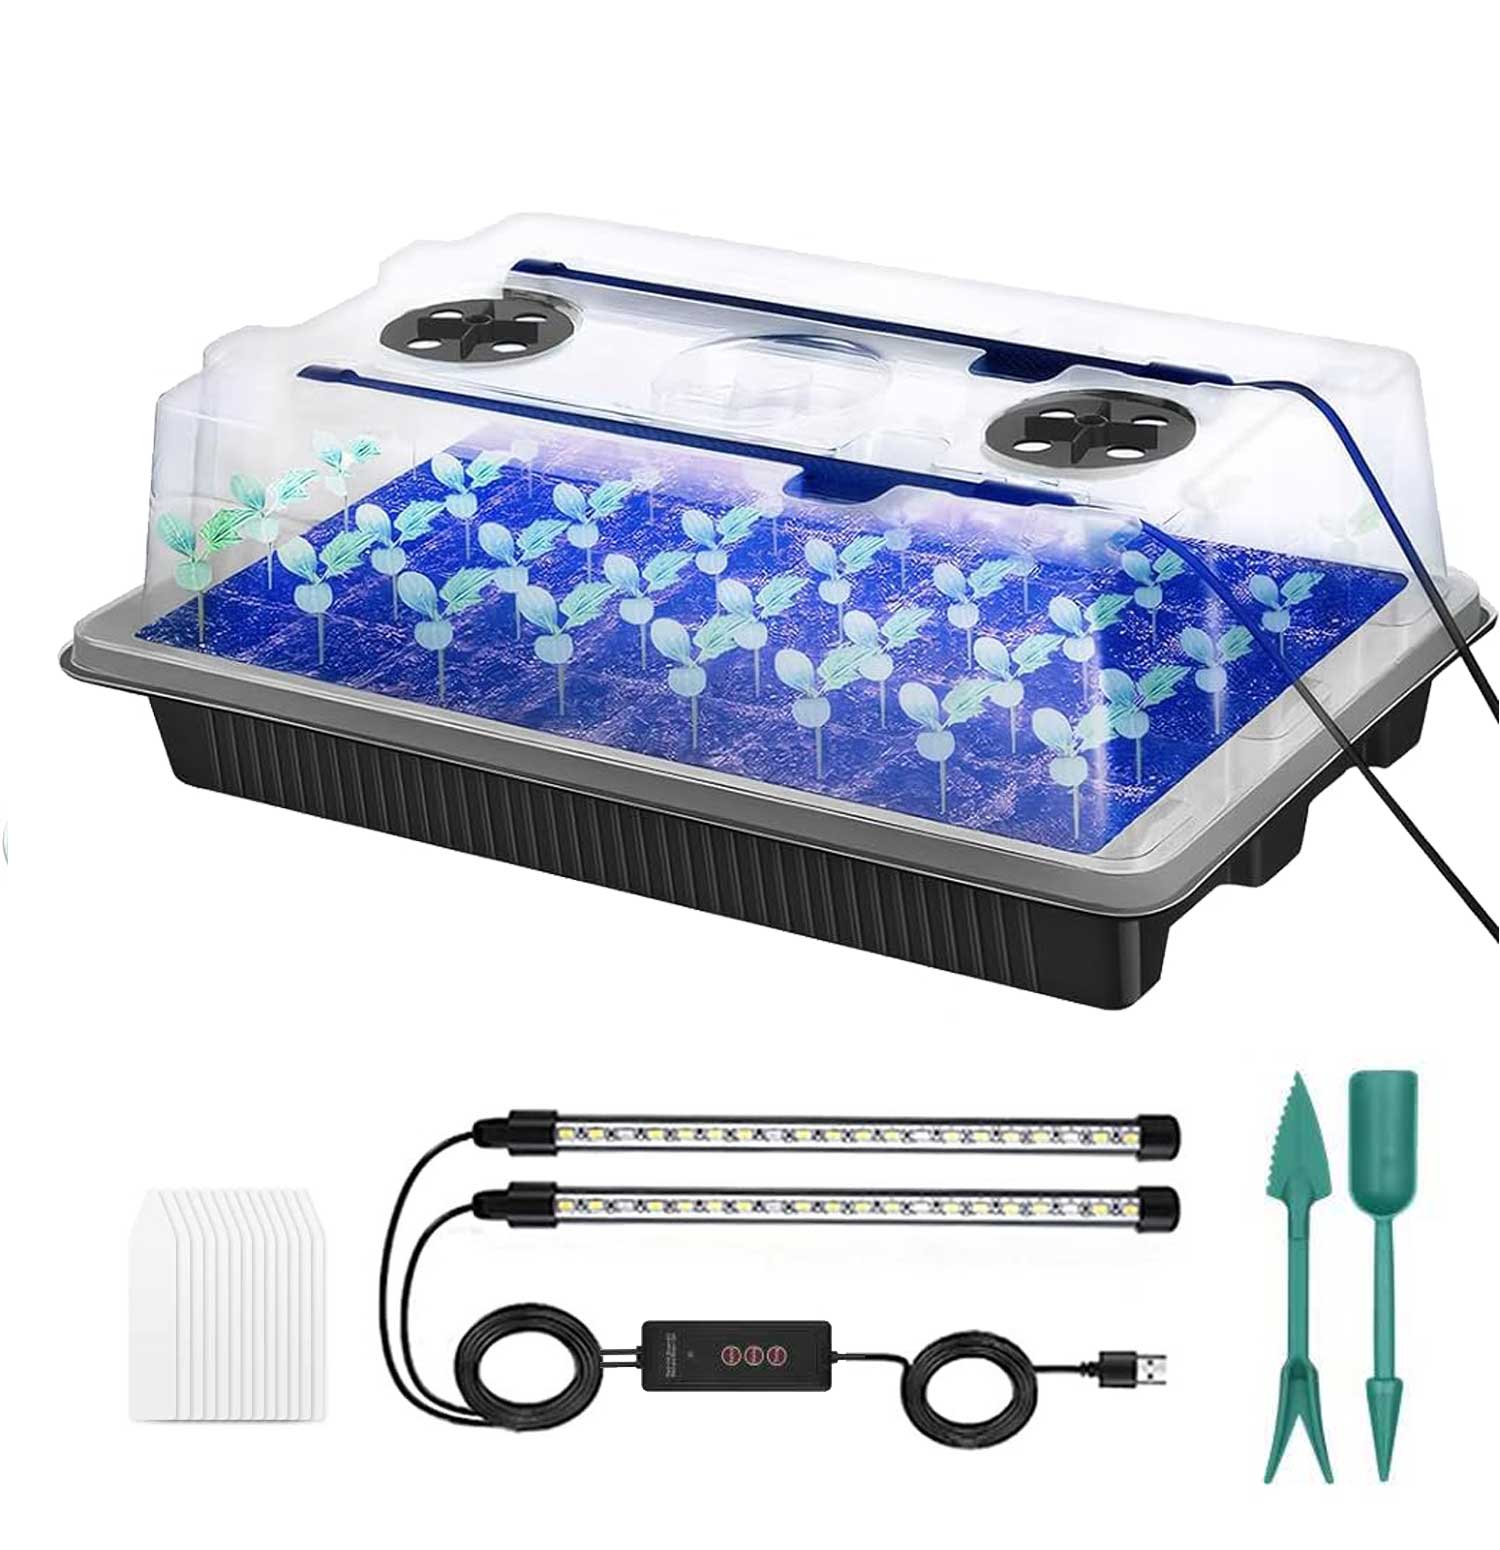 1 Packs Seed Starter Tray with Grow Light High Dome Seed Germination Kit 40 Cells with 2 LED Grow Lights Seedling Starter Kit with Smart Timer White&Blue Fullspectrum Growth Light